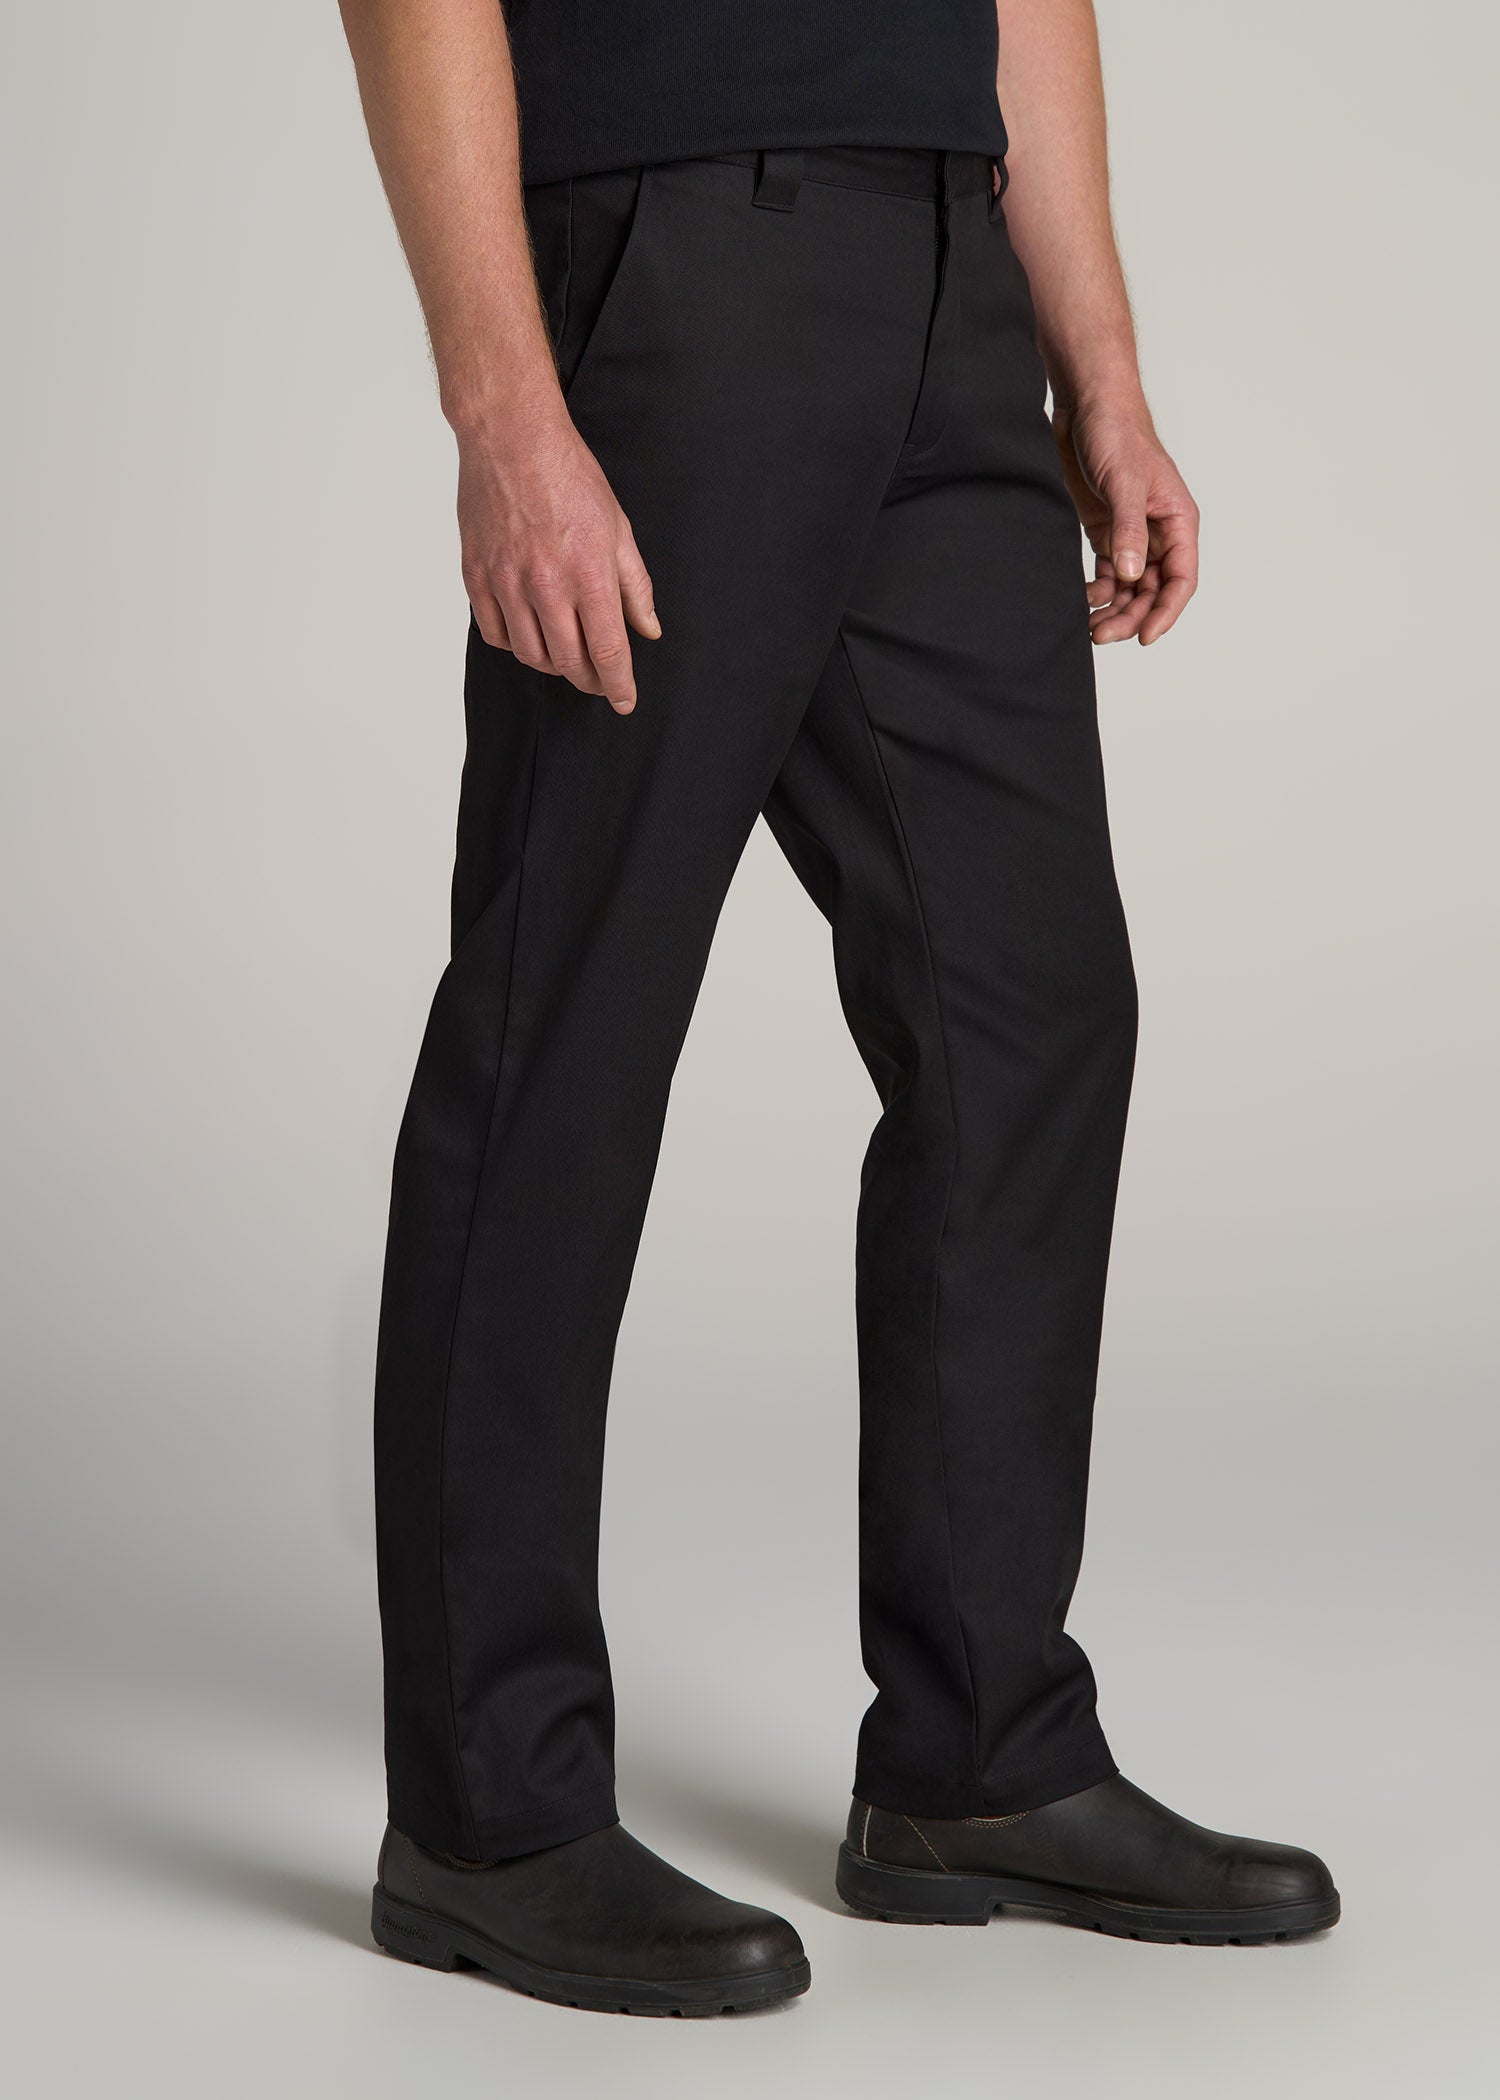 It's a double twill lycra stretchable pants for traveling, sports and